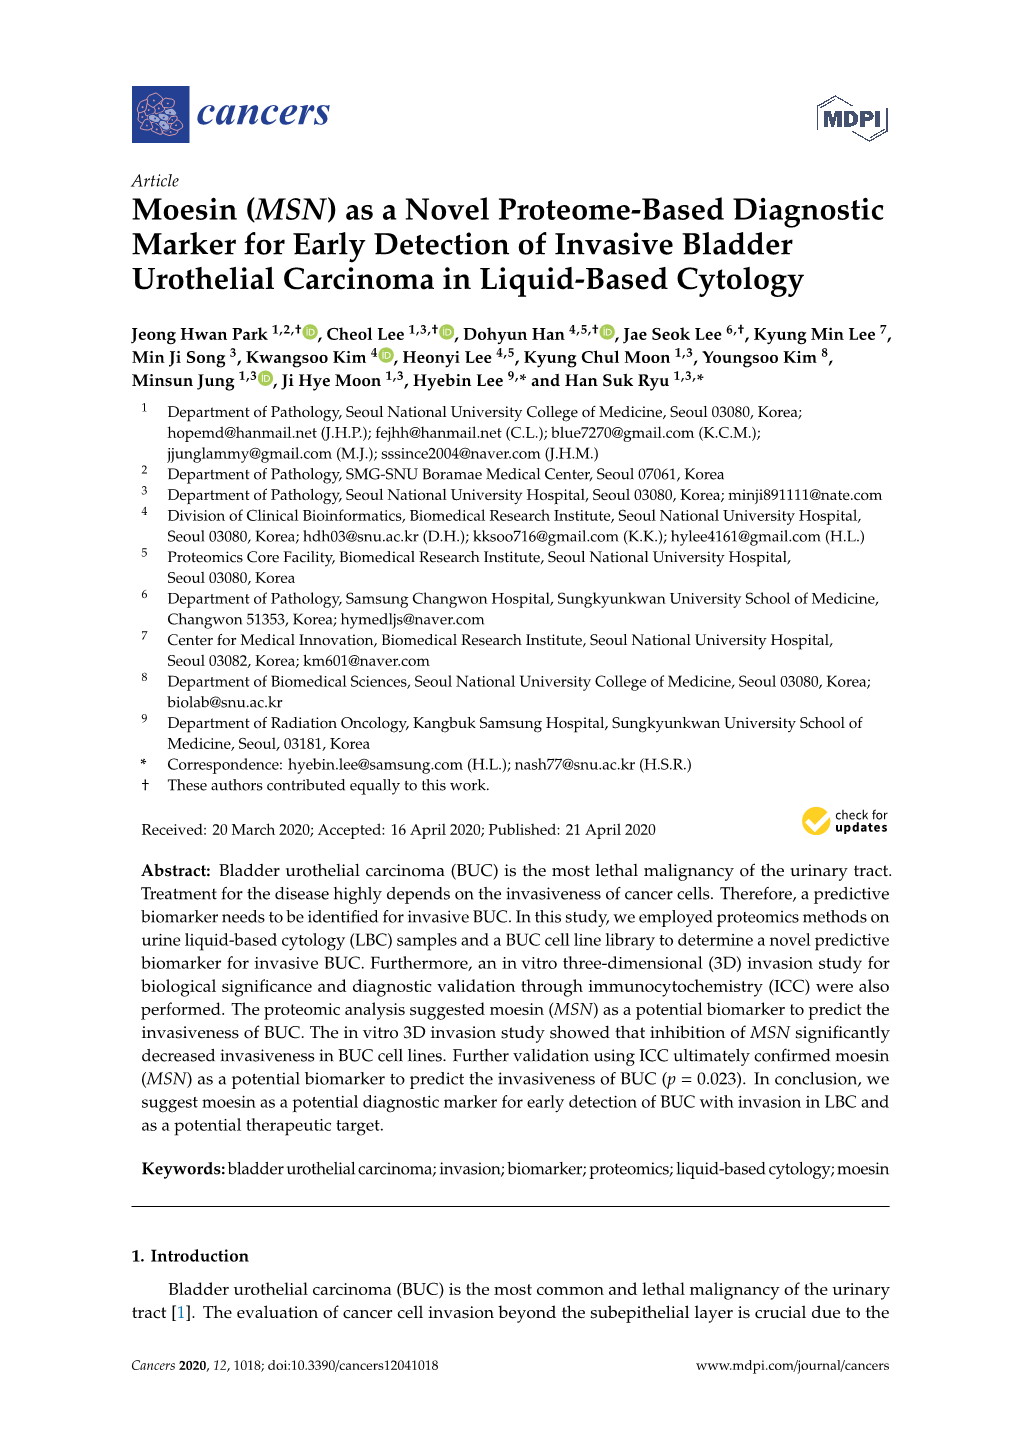 Moesin (MSN) As a Novel Proteome-Based Diagnostic Marker for Early Detection of Invasive Bladder Urothelial Carcinoma in Liquid-Based Cytology